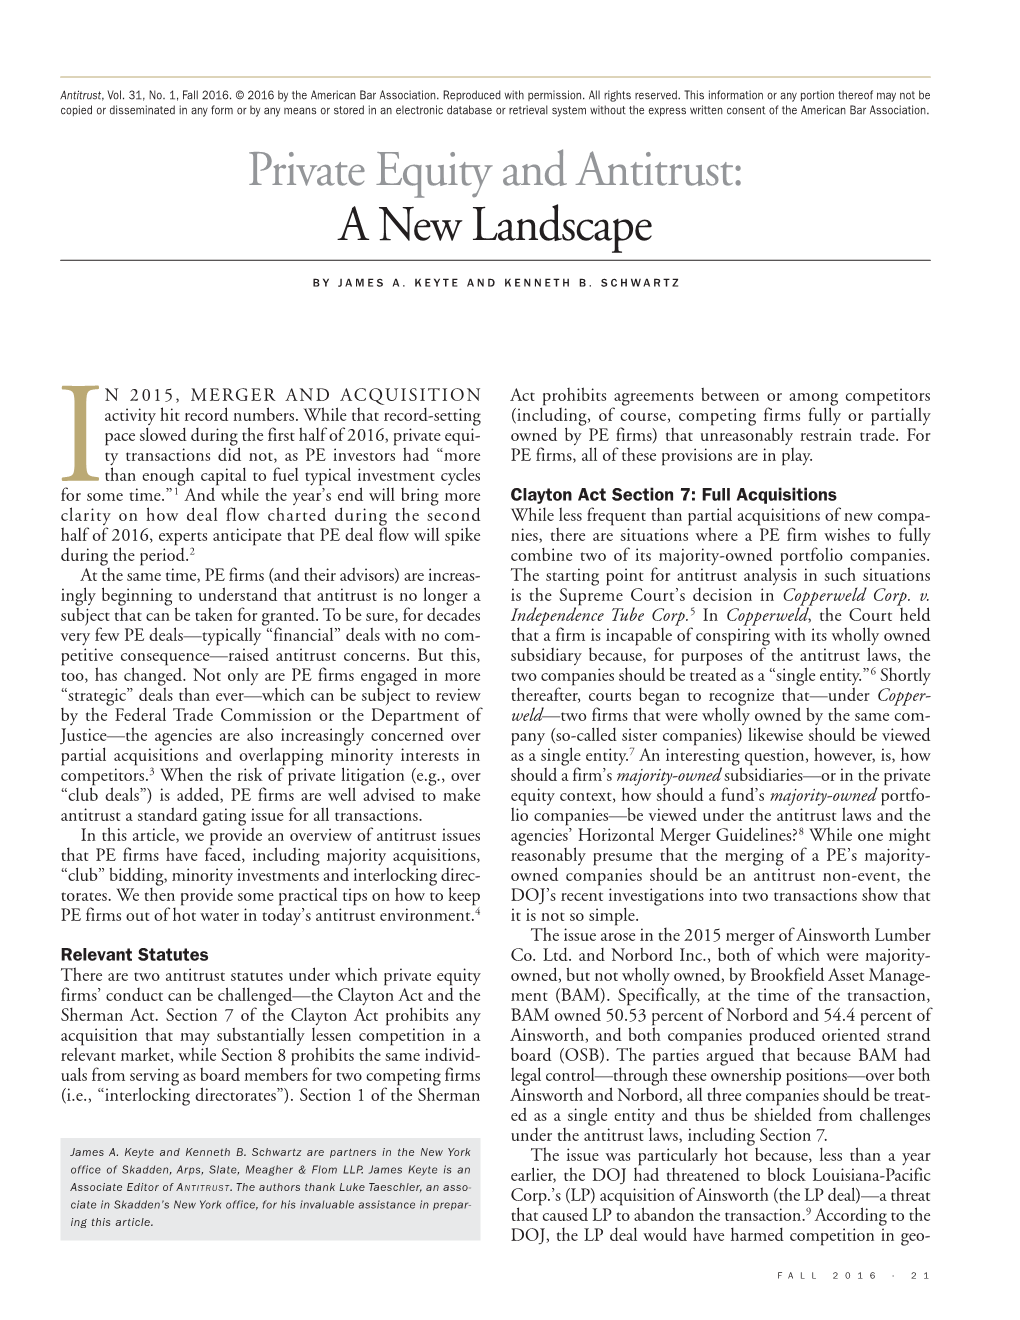 Private Equity and Antitrust: a New Landscape